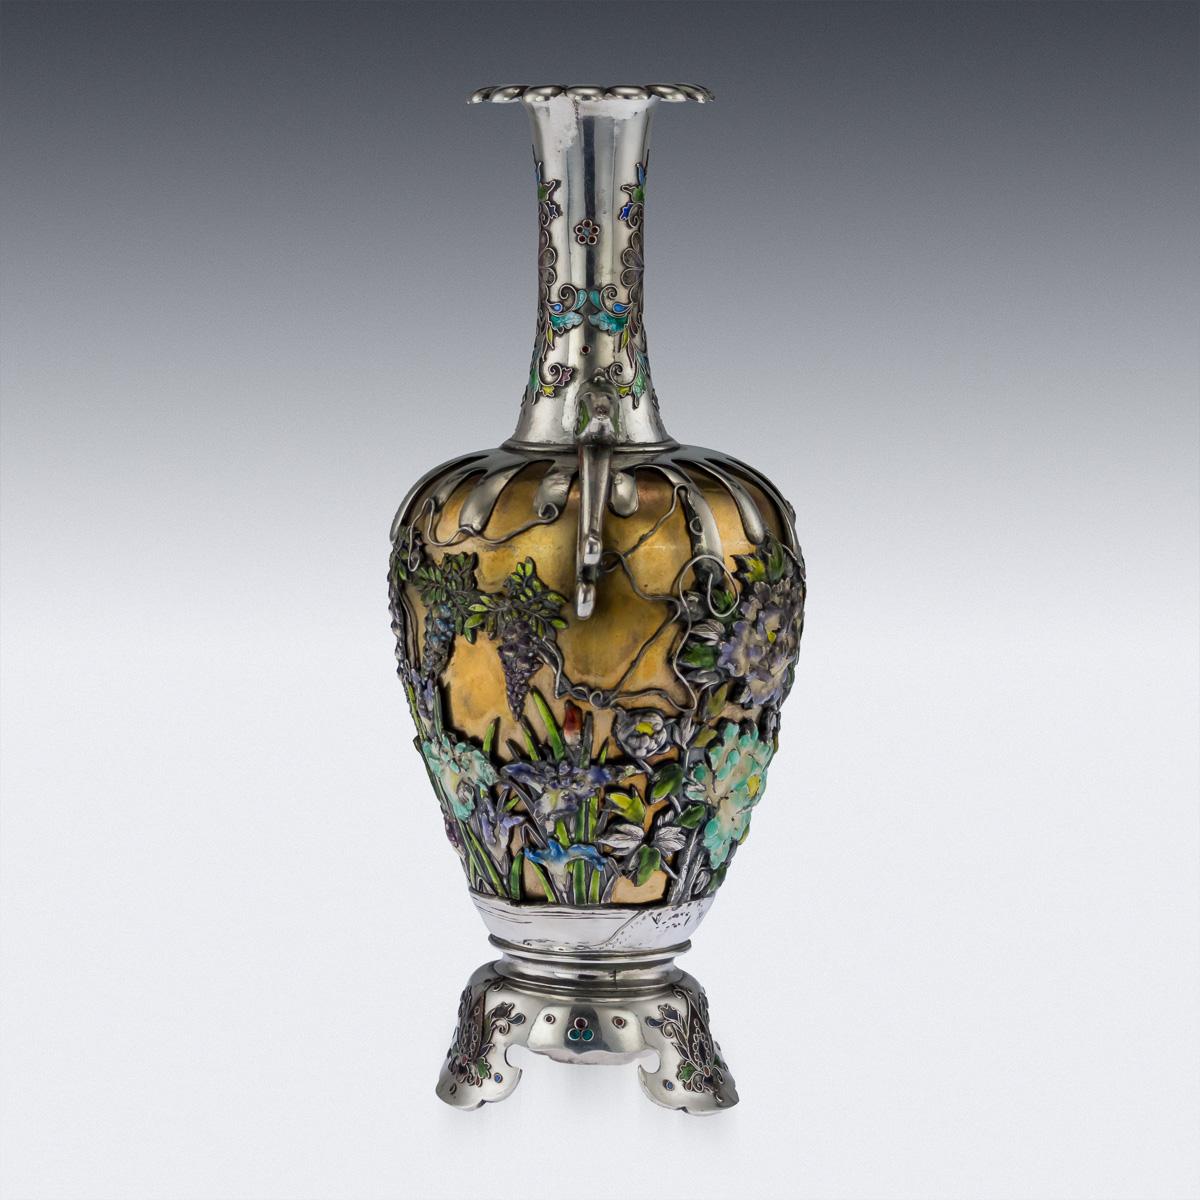 Description:

Antique late 19th century Japanese Meiji period exceptional quality solid silver and enamel vase, The body decorated with butterflies fluttering amongst chrysanthemum, wisteria and foliage, the neck and foot with stylized flower